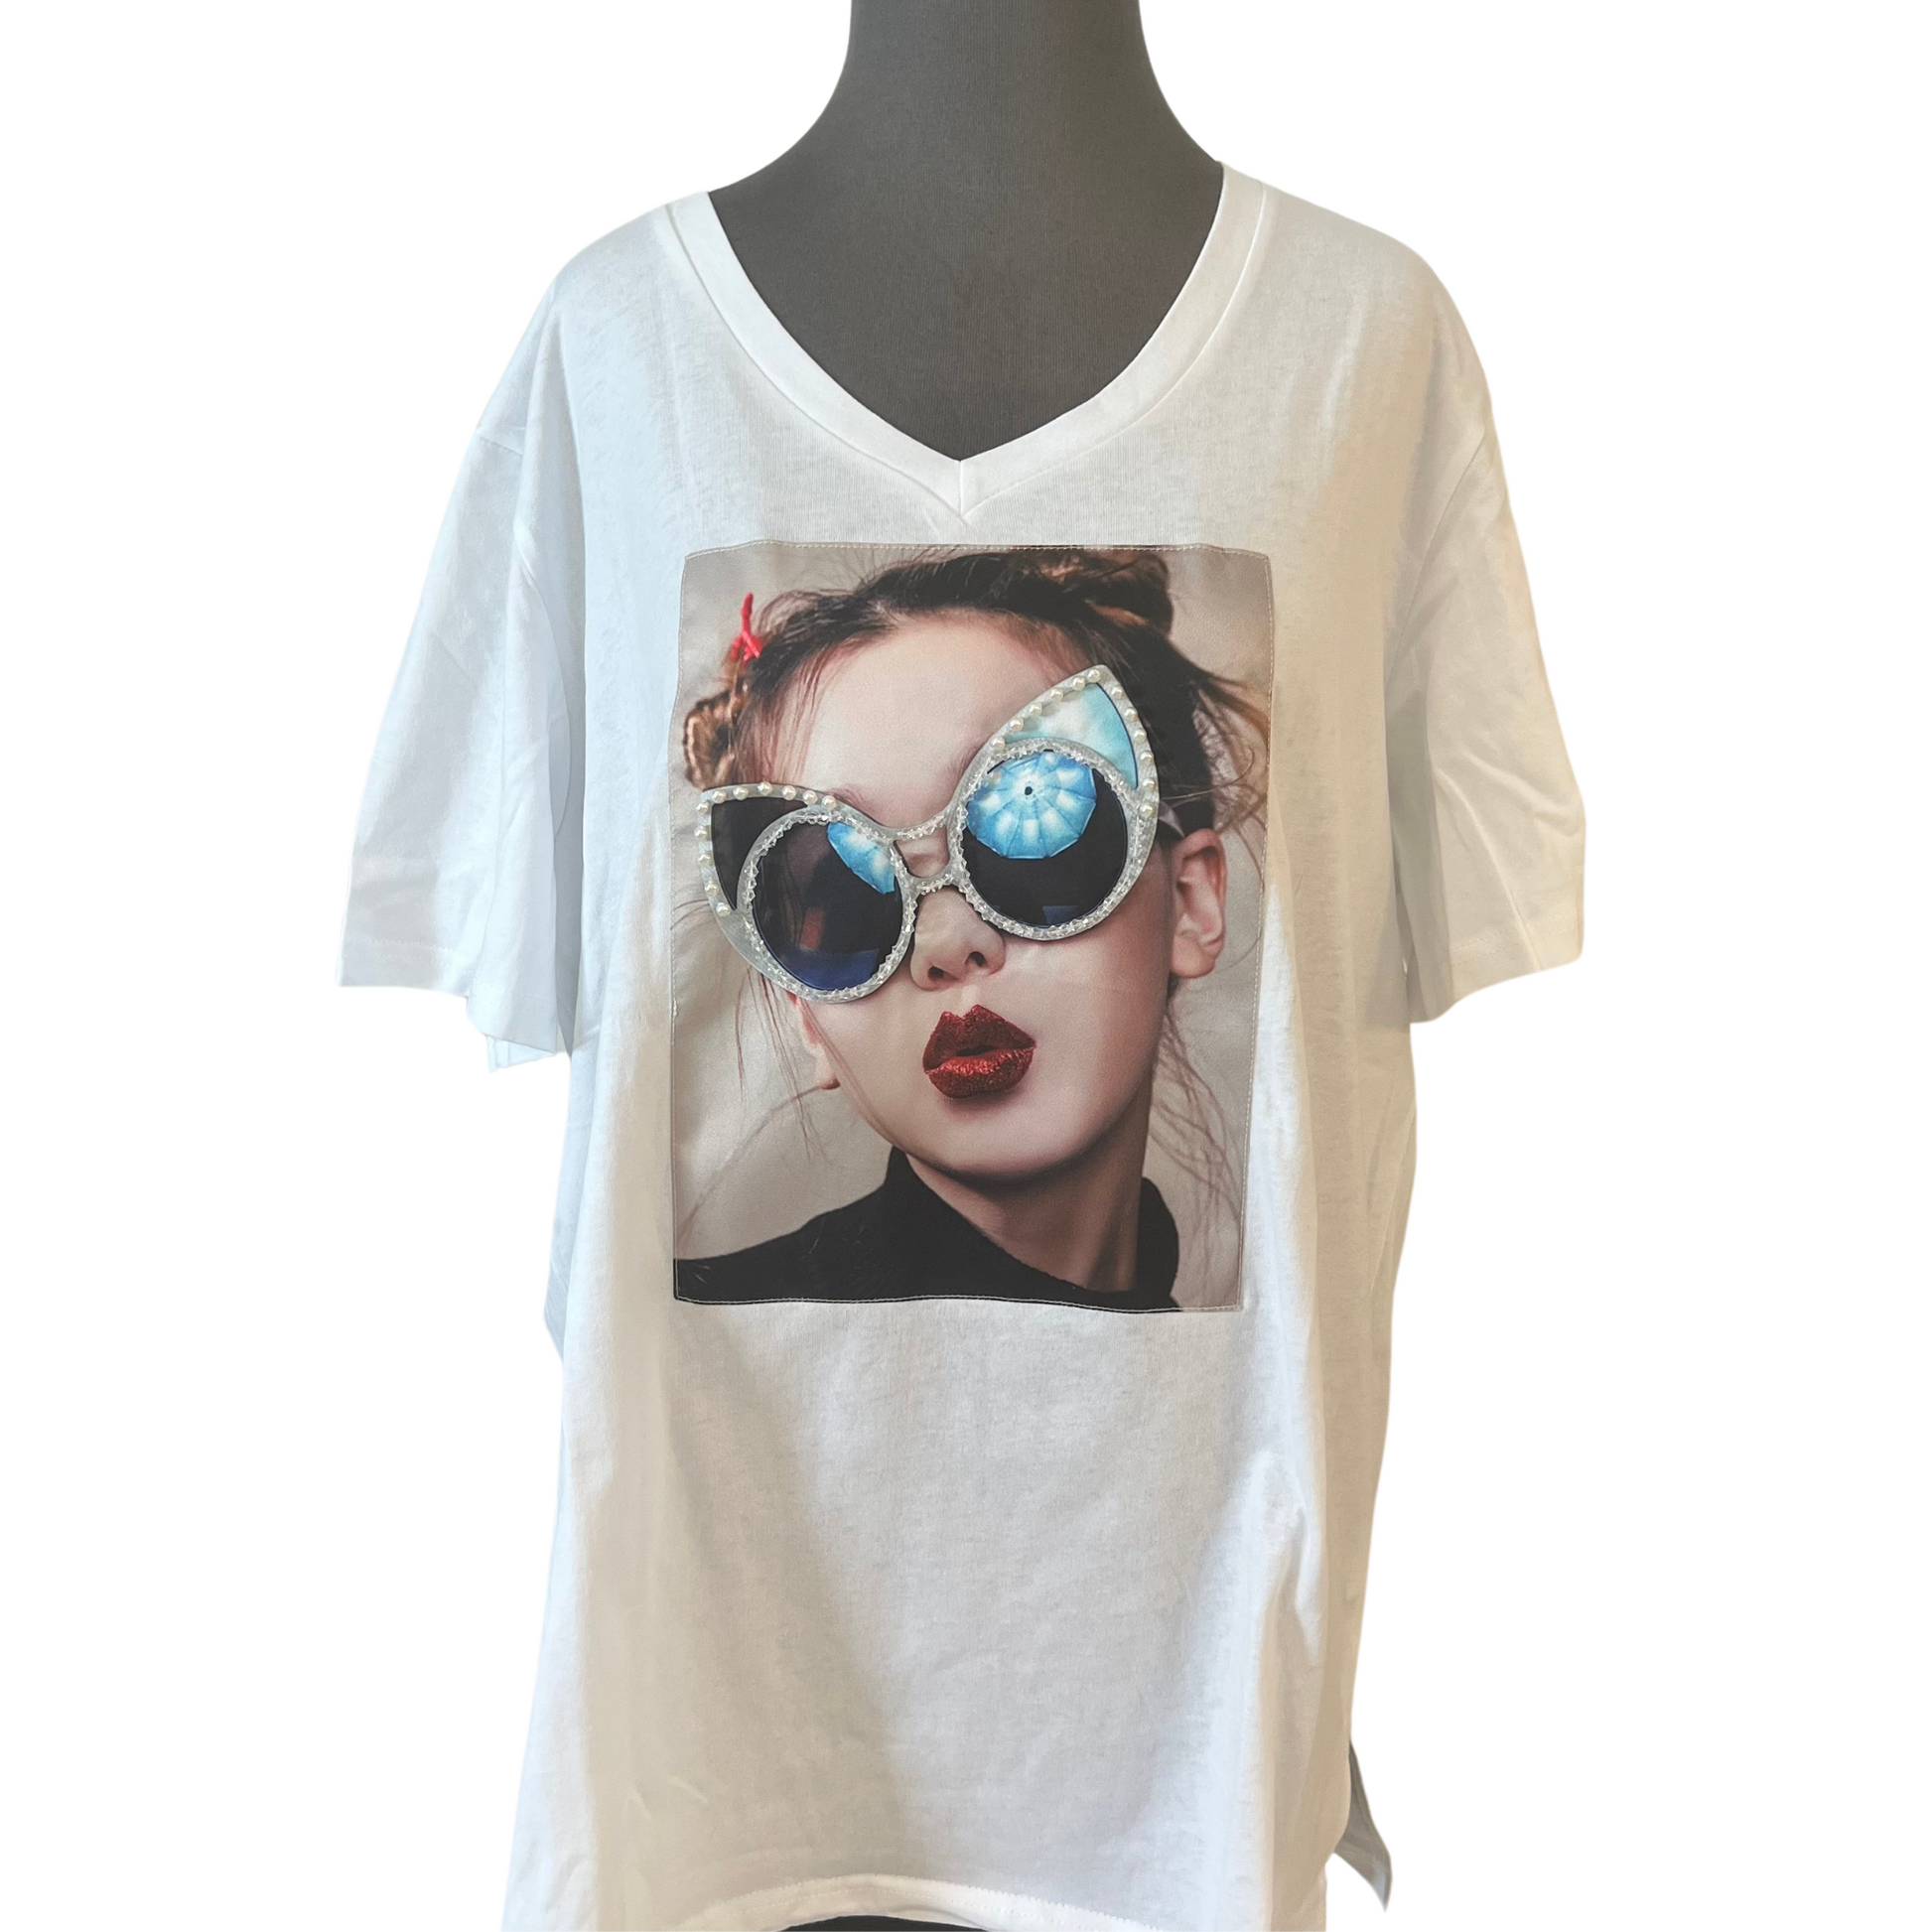 V-Neck bejeweled graphic tee in white with sunglasses and pearl accents